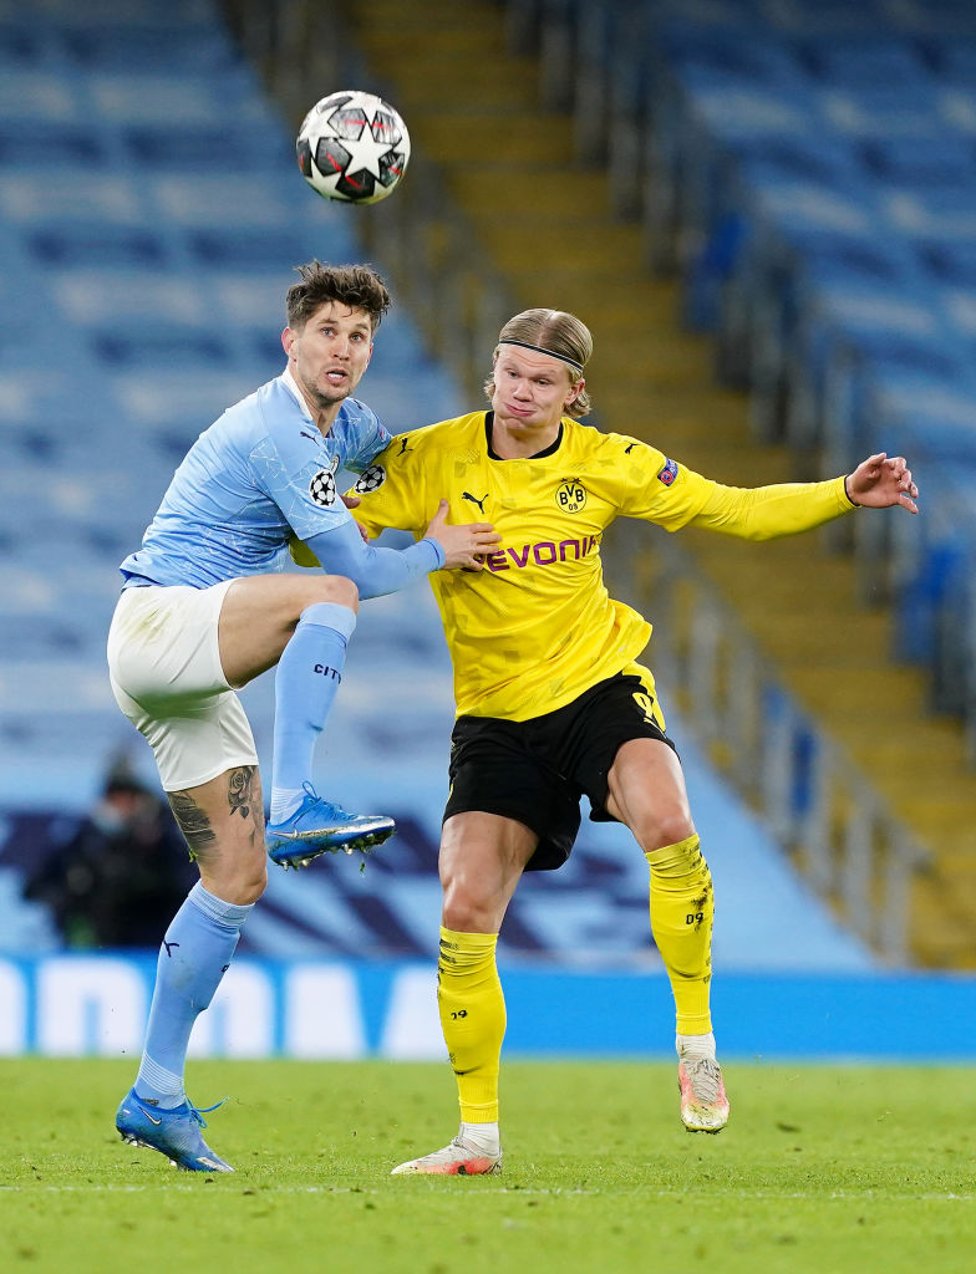 TOUCH TIGHT : Stones and Haaland jostle for possession.